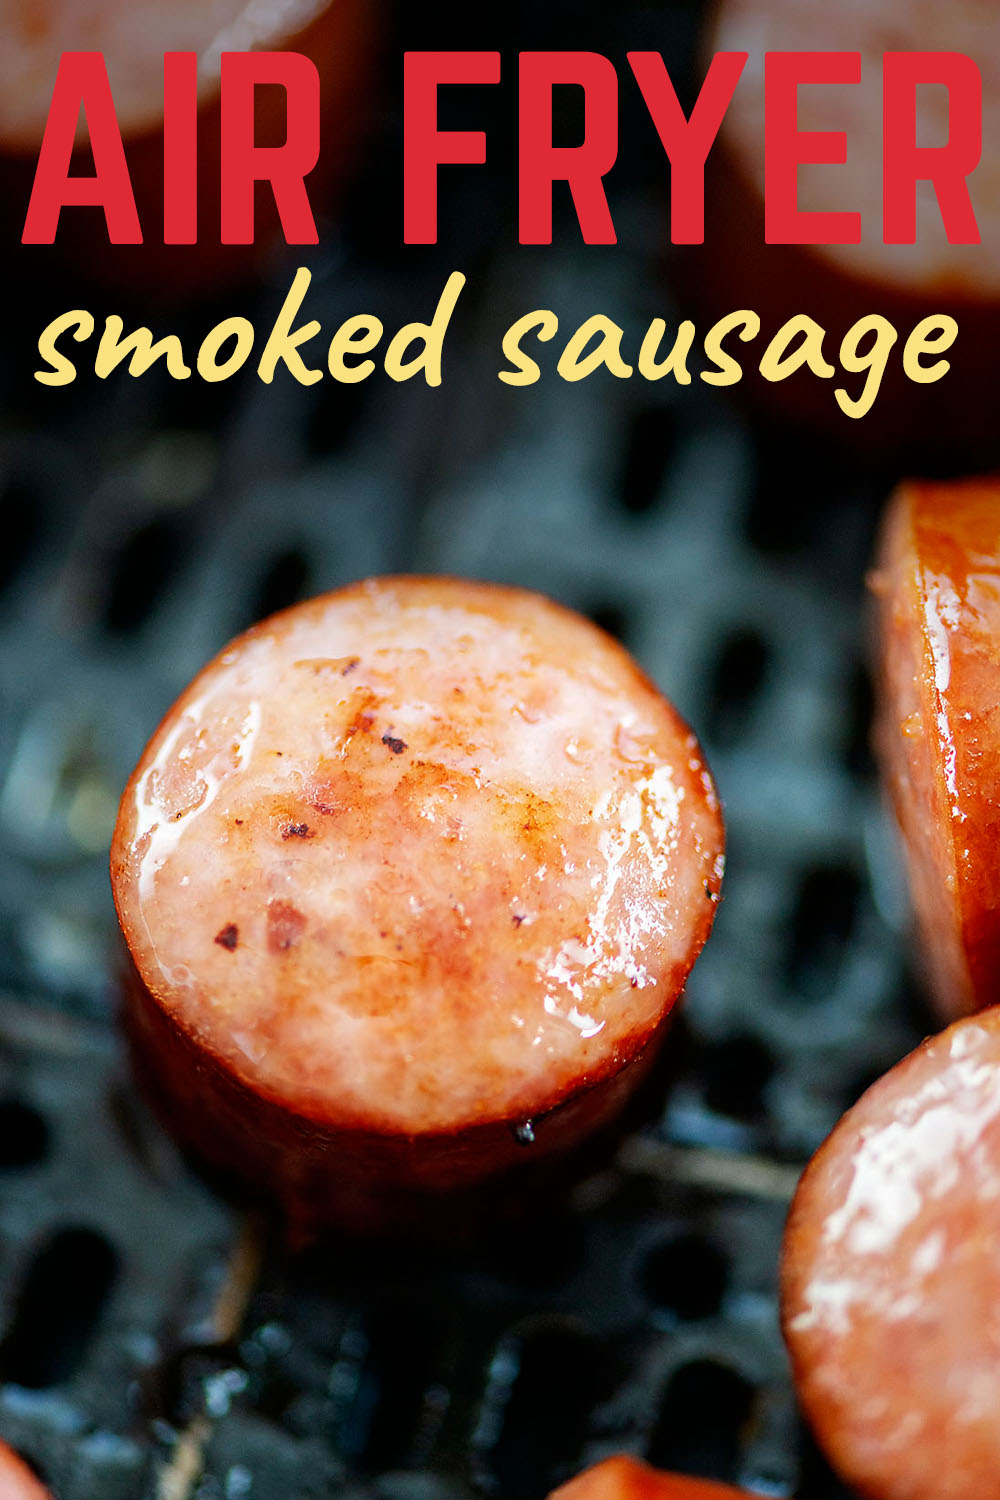 The air fryer is the PERFECT way to cook smoked sausage!